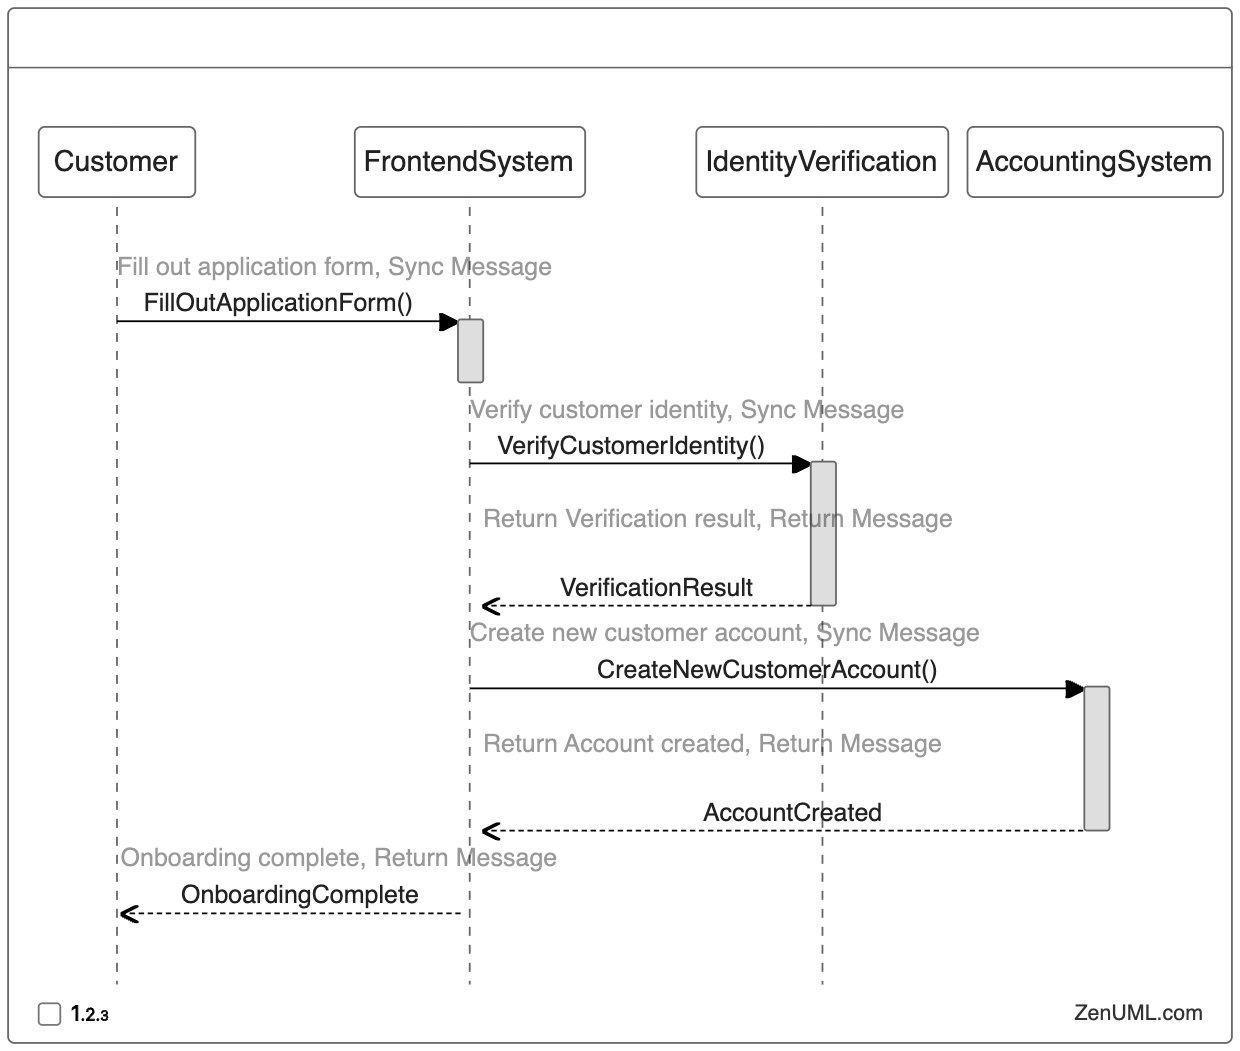 Customer Onboarding Process in Sequence Diagram